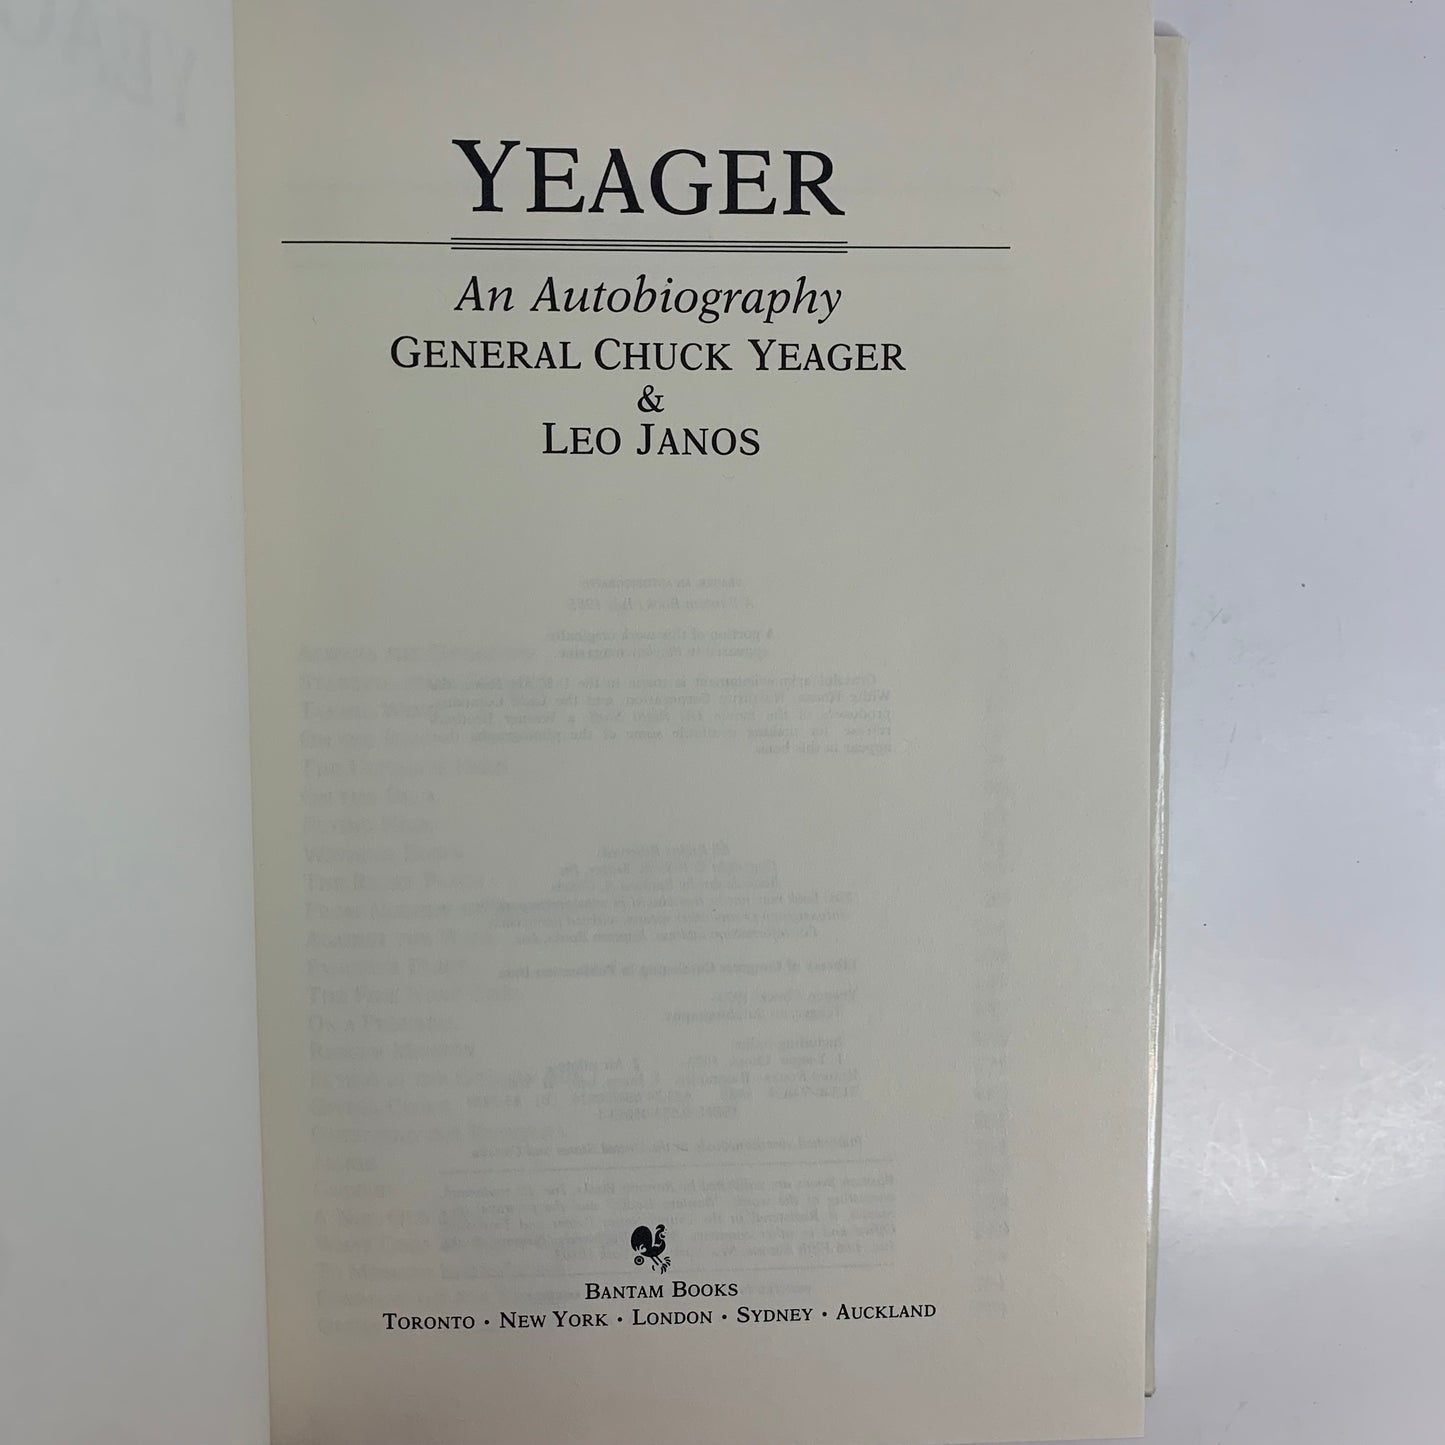 Yeager - General Chuck Yeager and Leo Janos - Signed - 1985